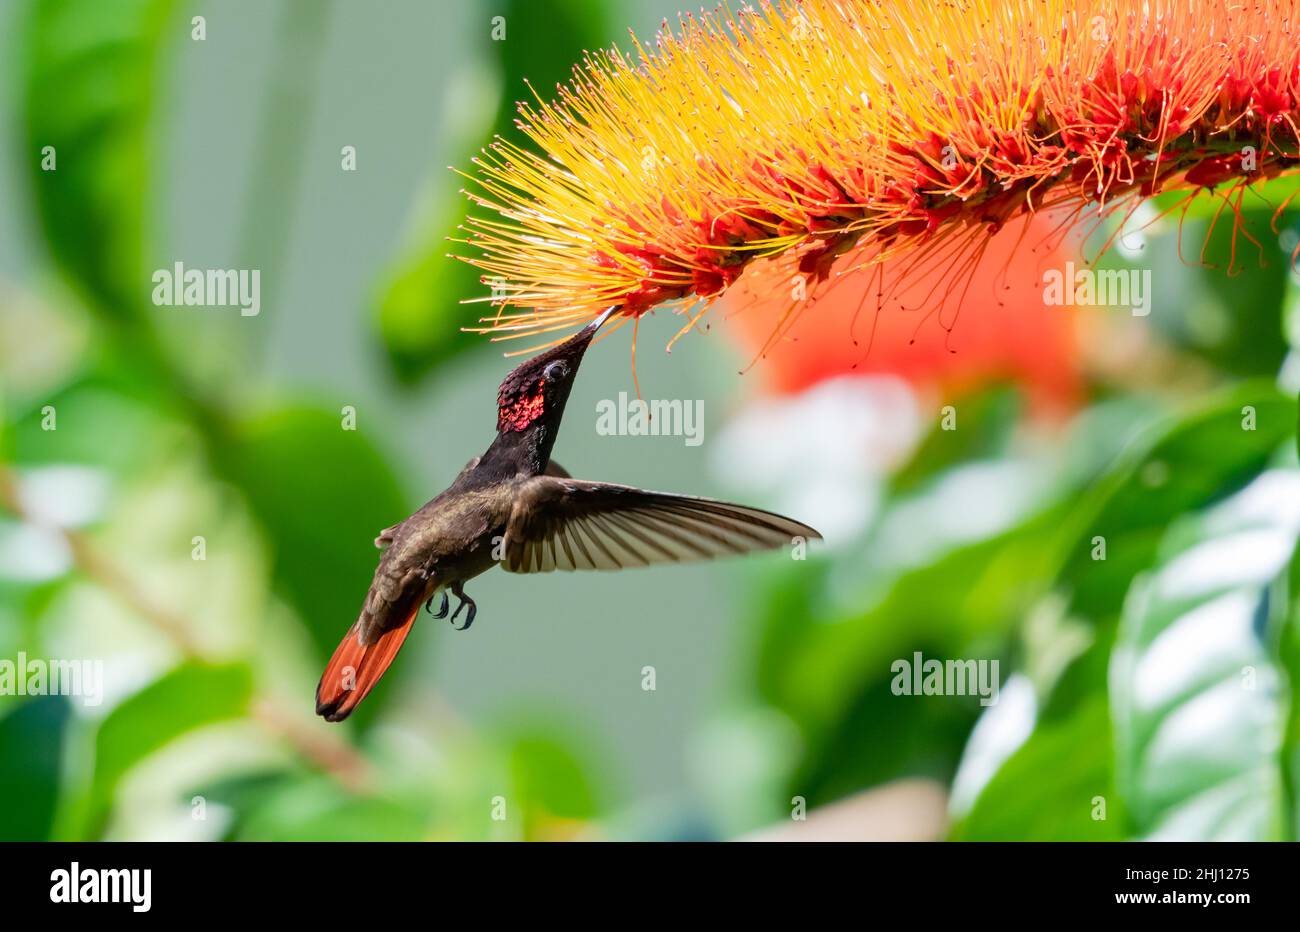 Brilliant red and gold Ruby Topaz hummingbird, Chrysolampis mosquitus, feeding on a tropical Combretum flower (Monkey brush) in a garden. Stock Photo